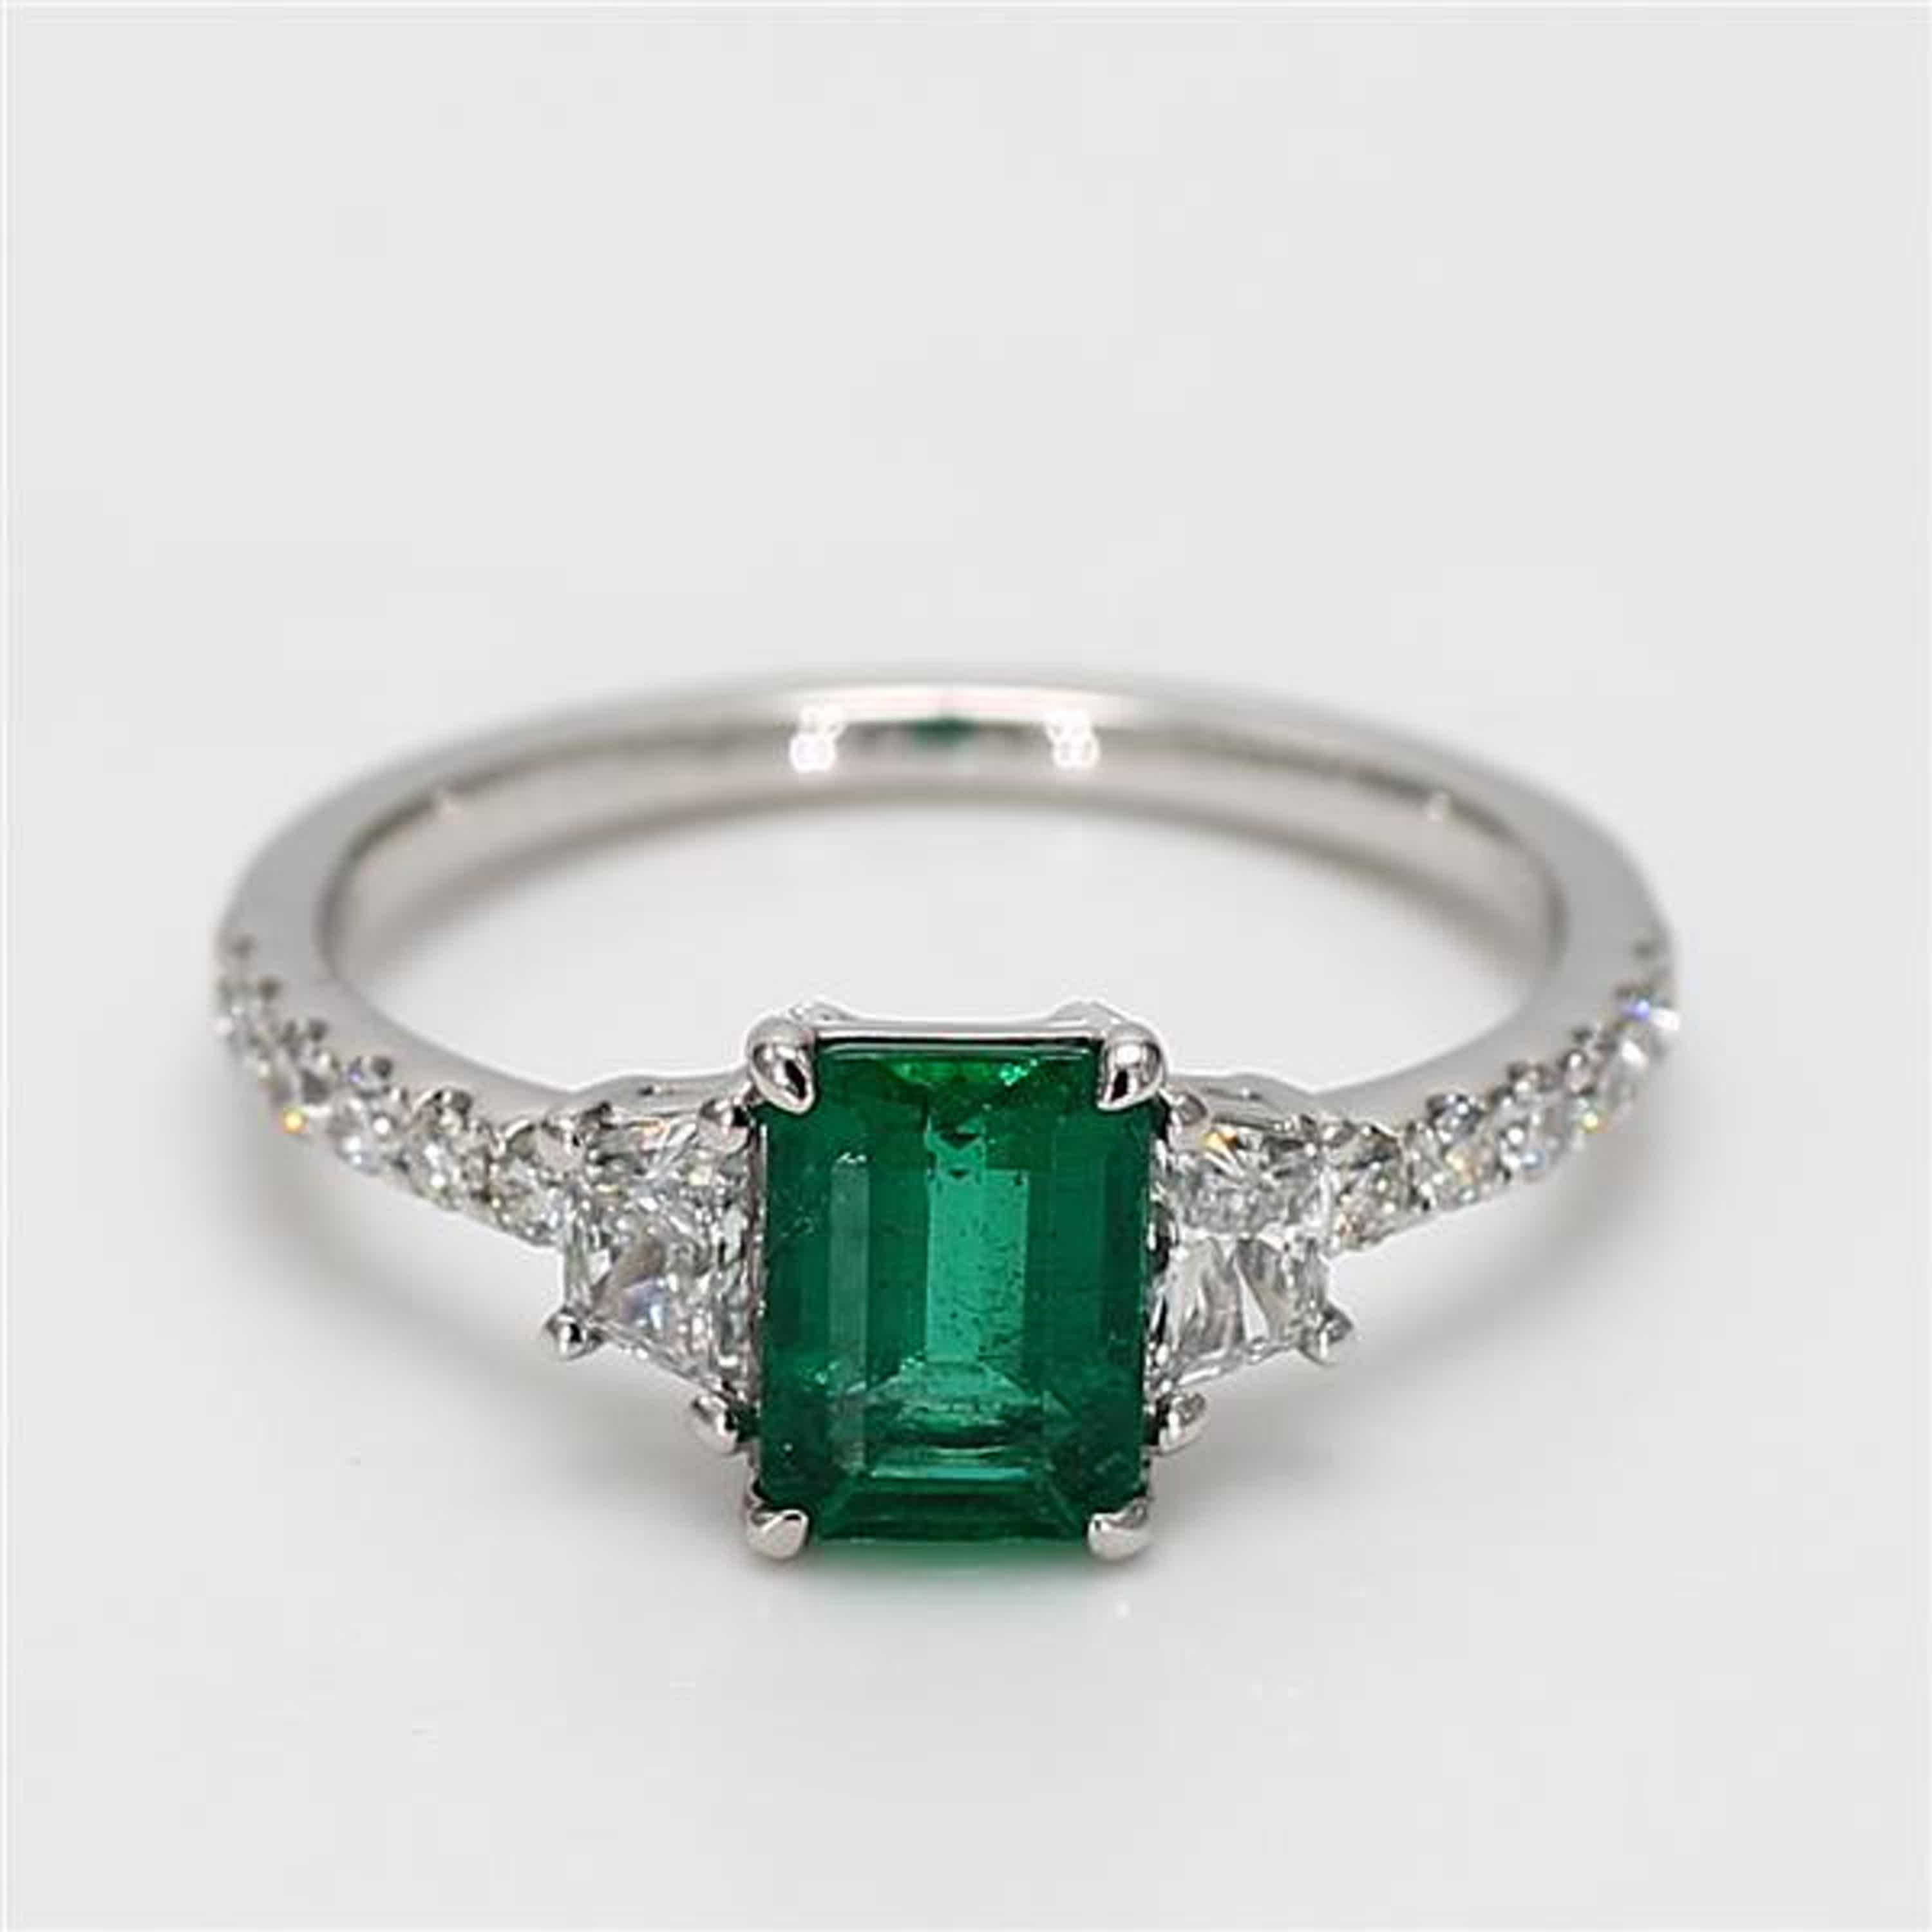 RareGemWorld's classic emerald ring. Mounted in a beautiful 18K White Gold setting with a natural emerald cut emerald. The emerald is surrounded by natural round white diamond melee as well as natural taper baguette cut white diamonds. This ring is